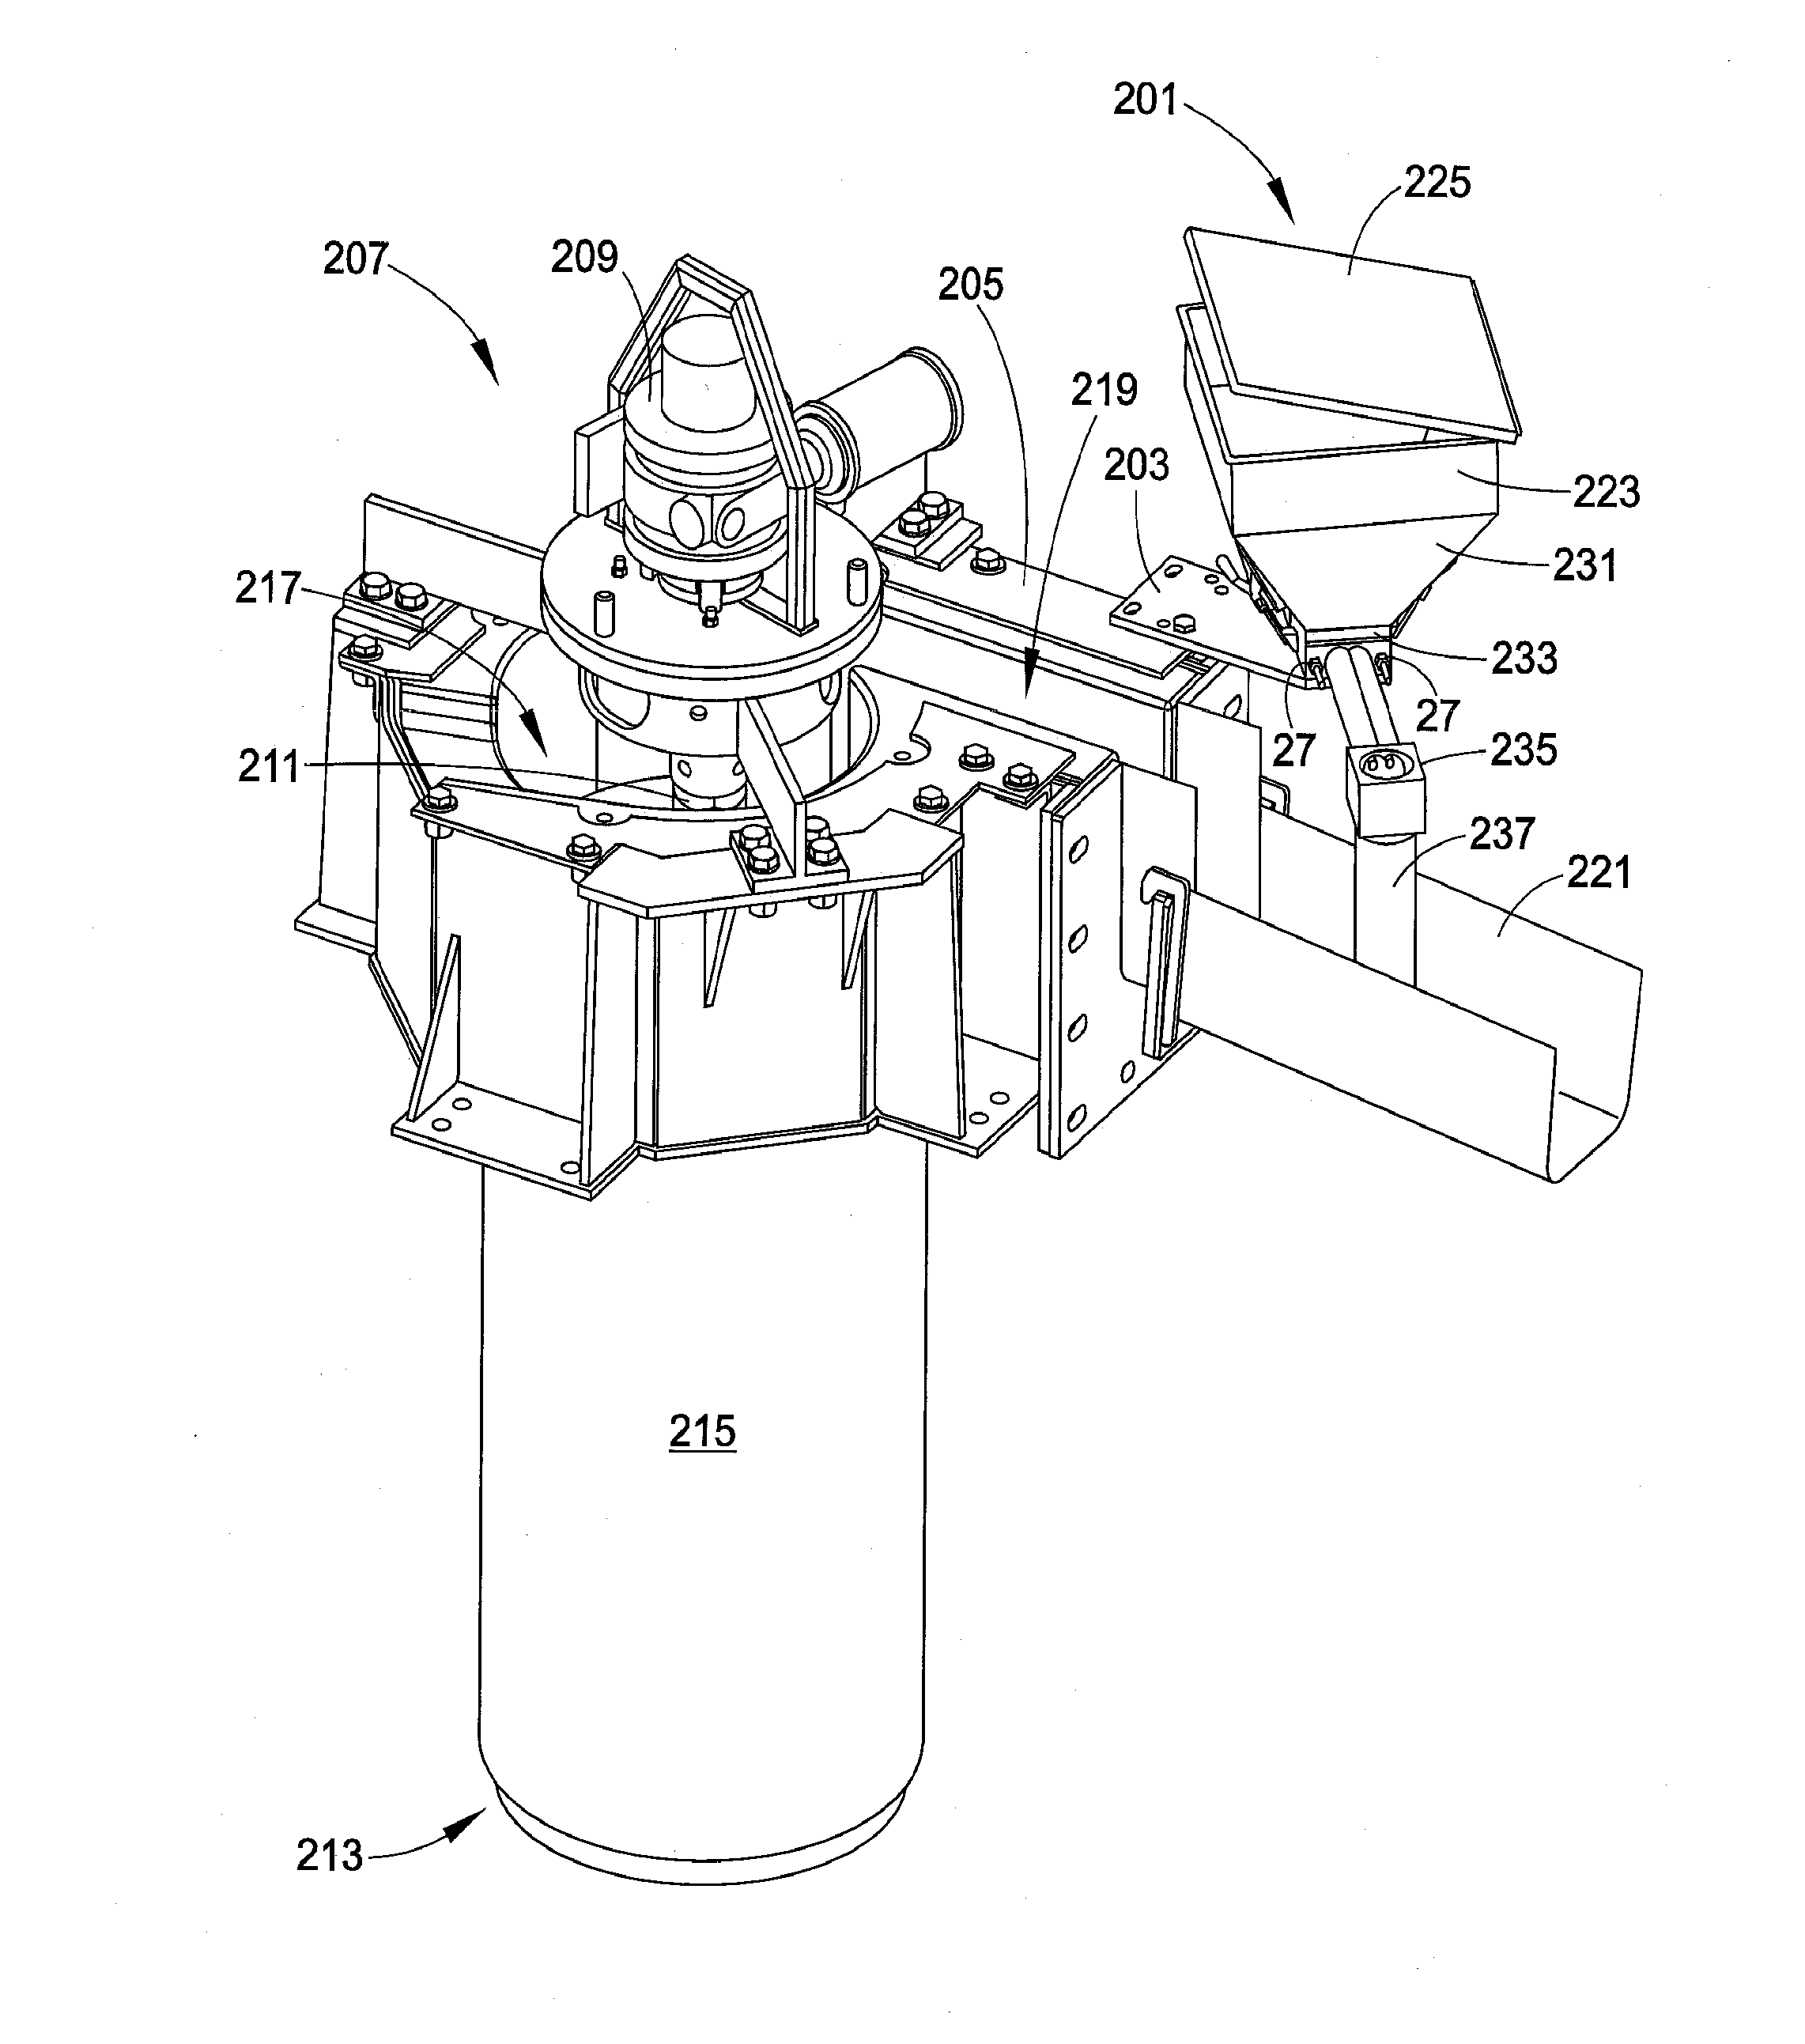 Overflow molten metal transfer pump with gas and flux injection